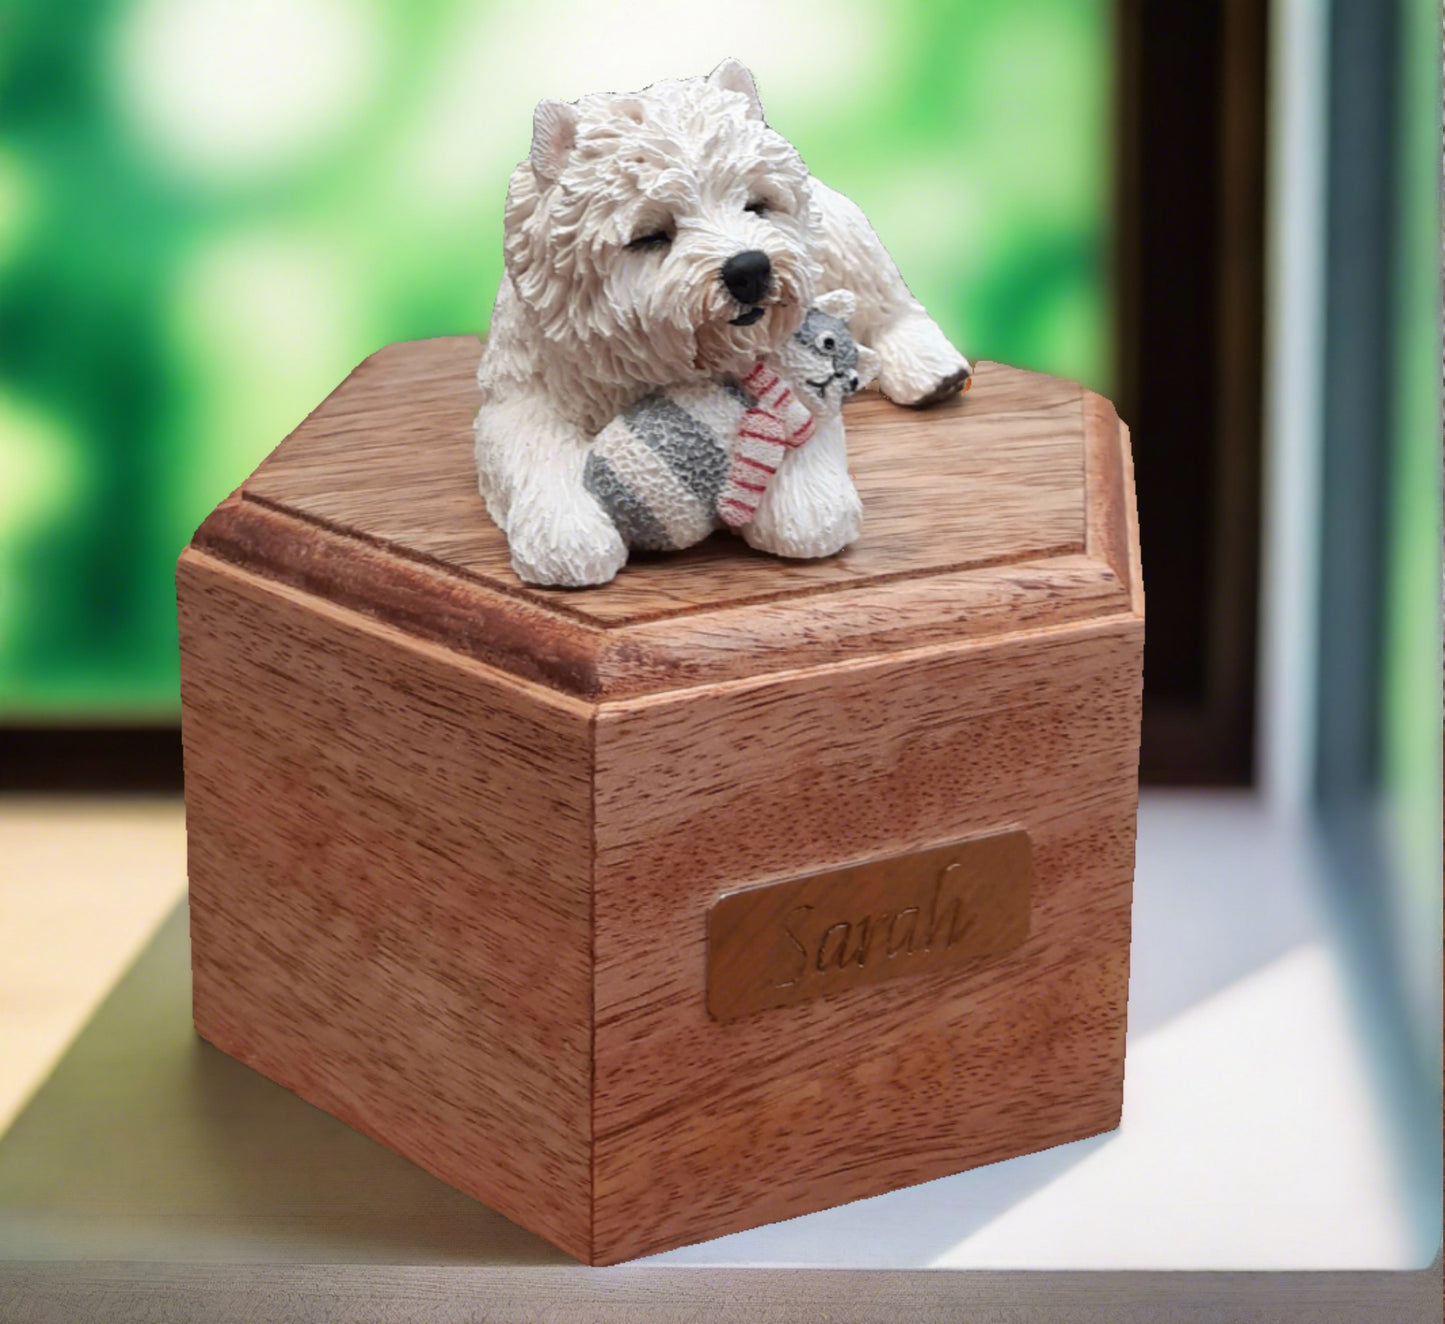 Wooden Pillbox Style Cremation Urn For West Highland White Terrier.